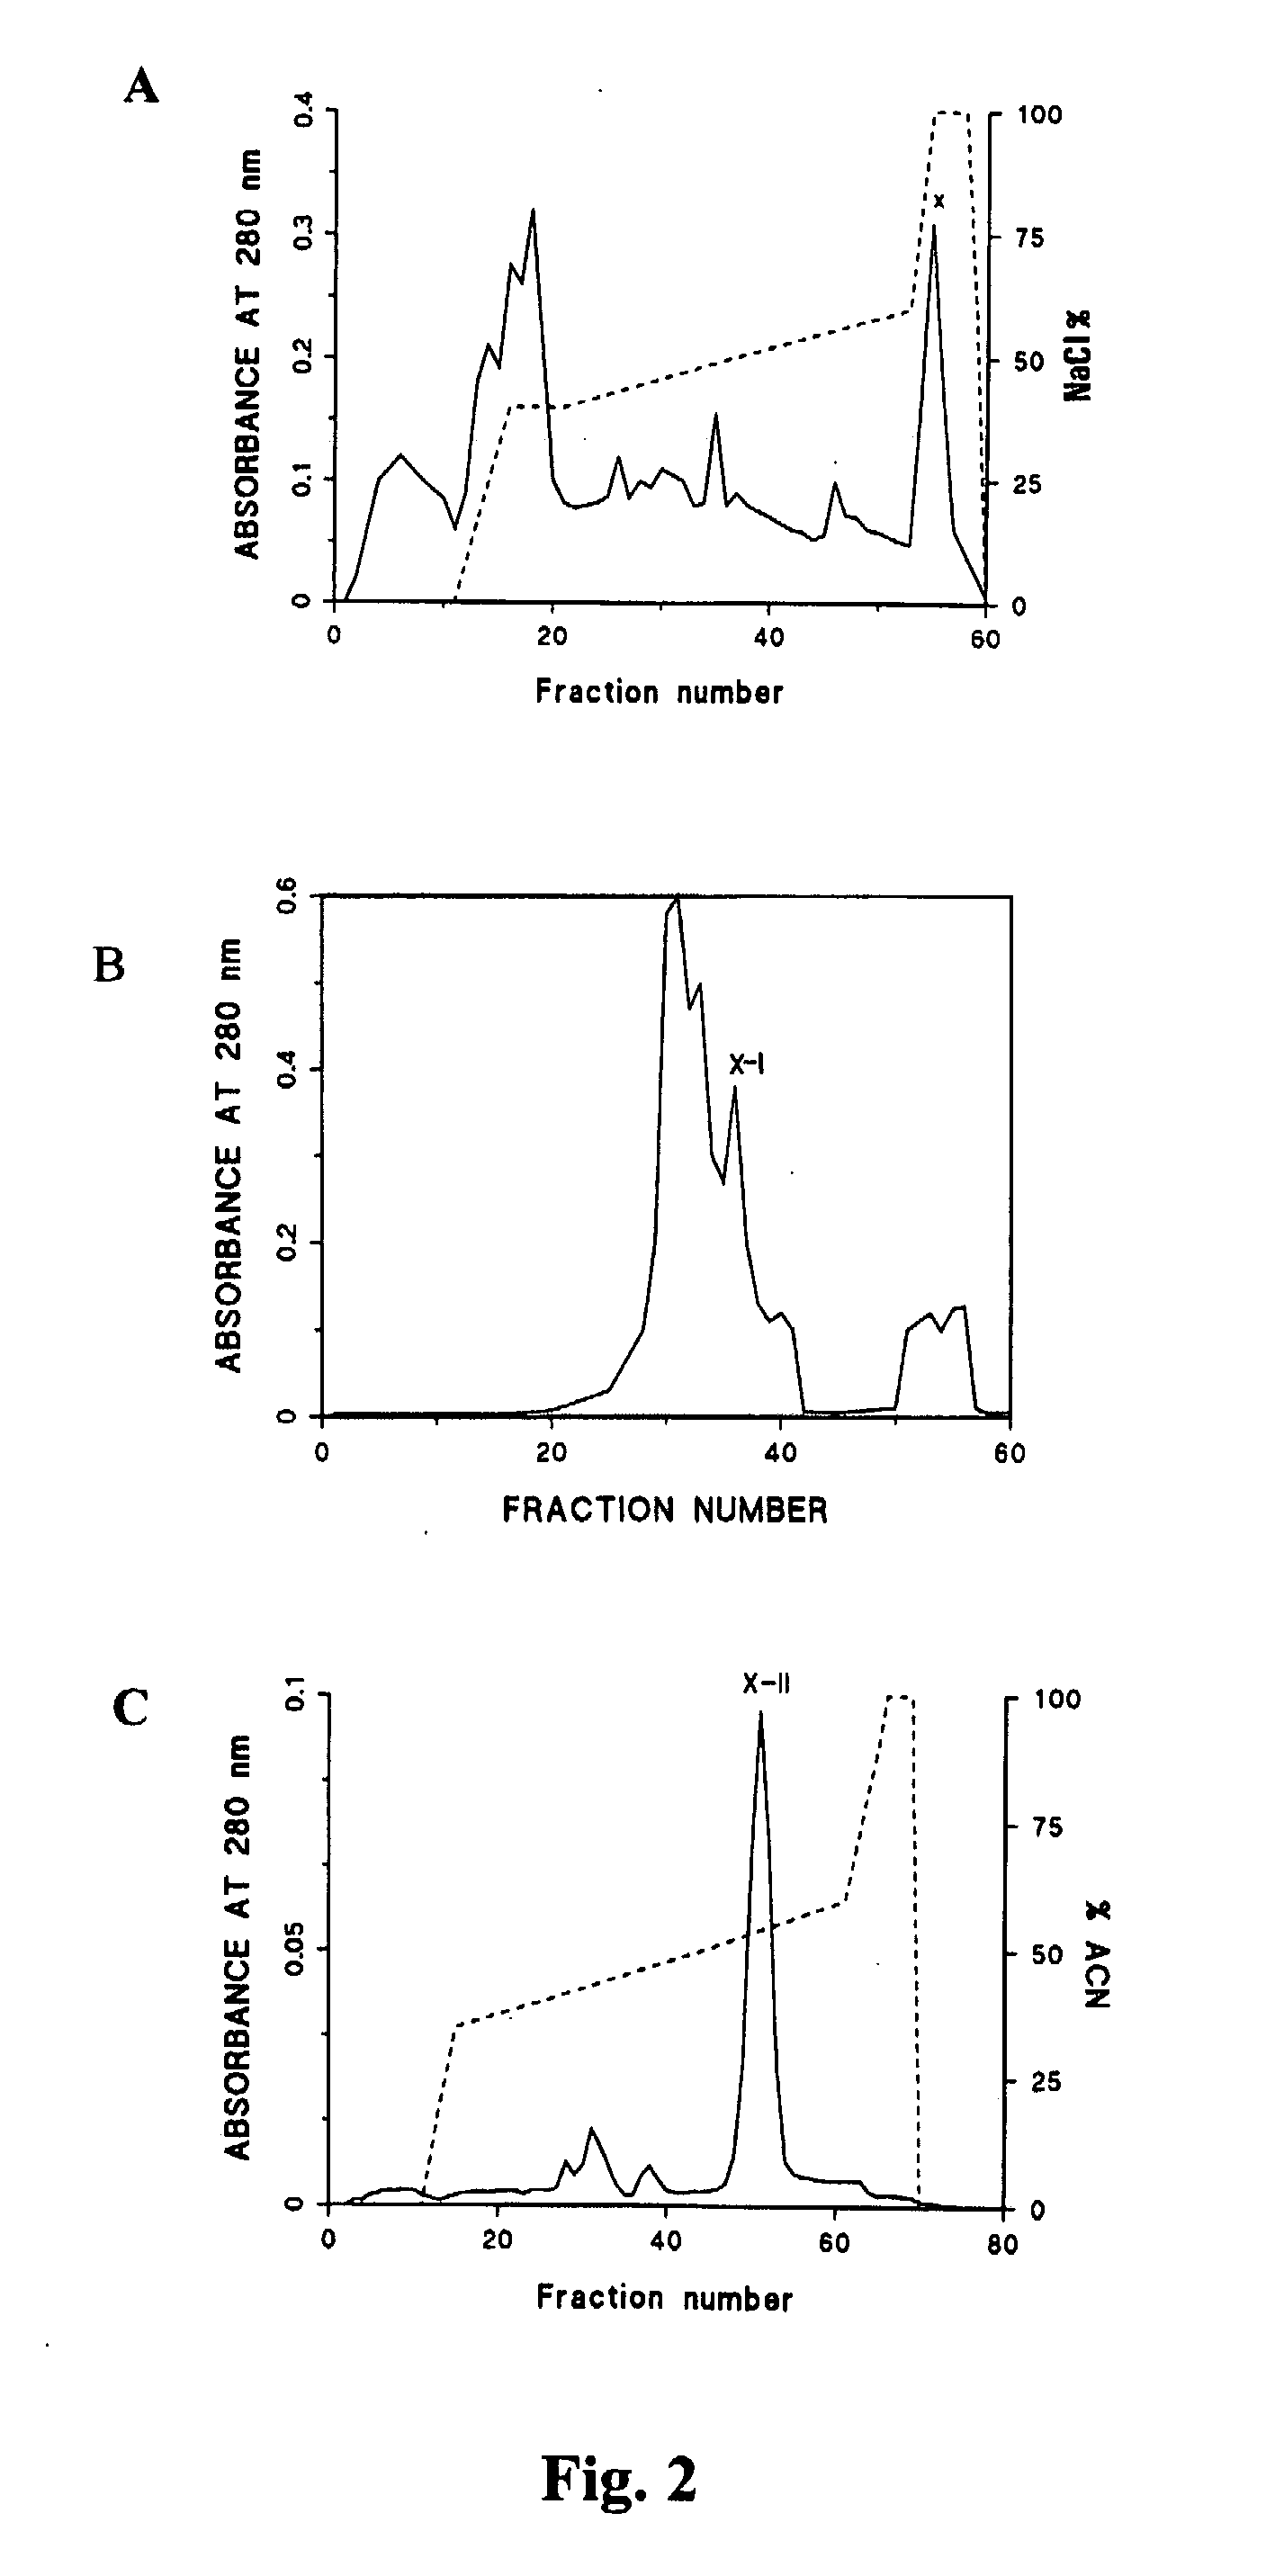 Novel therapeutic and prophylactic agents and methods of using the same